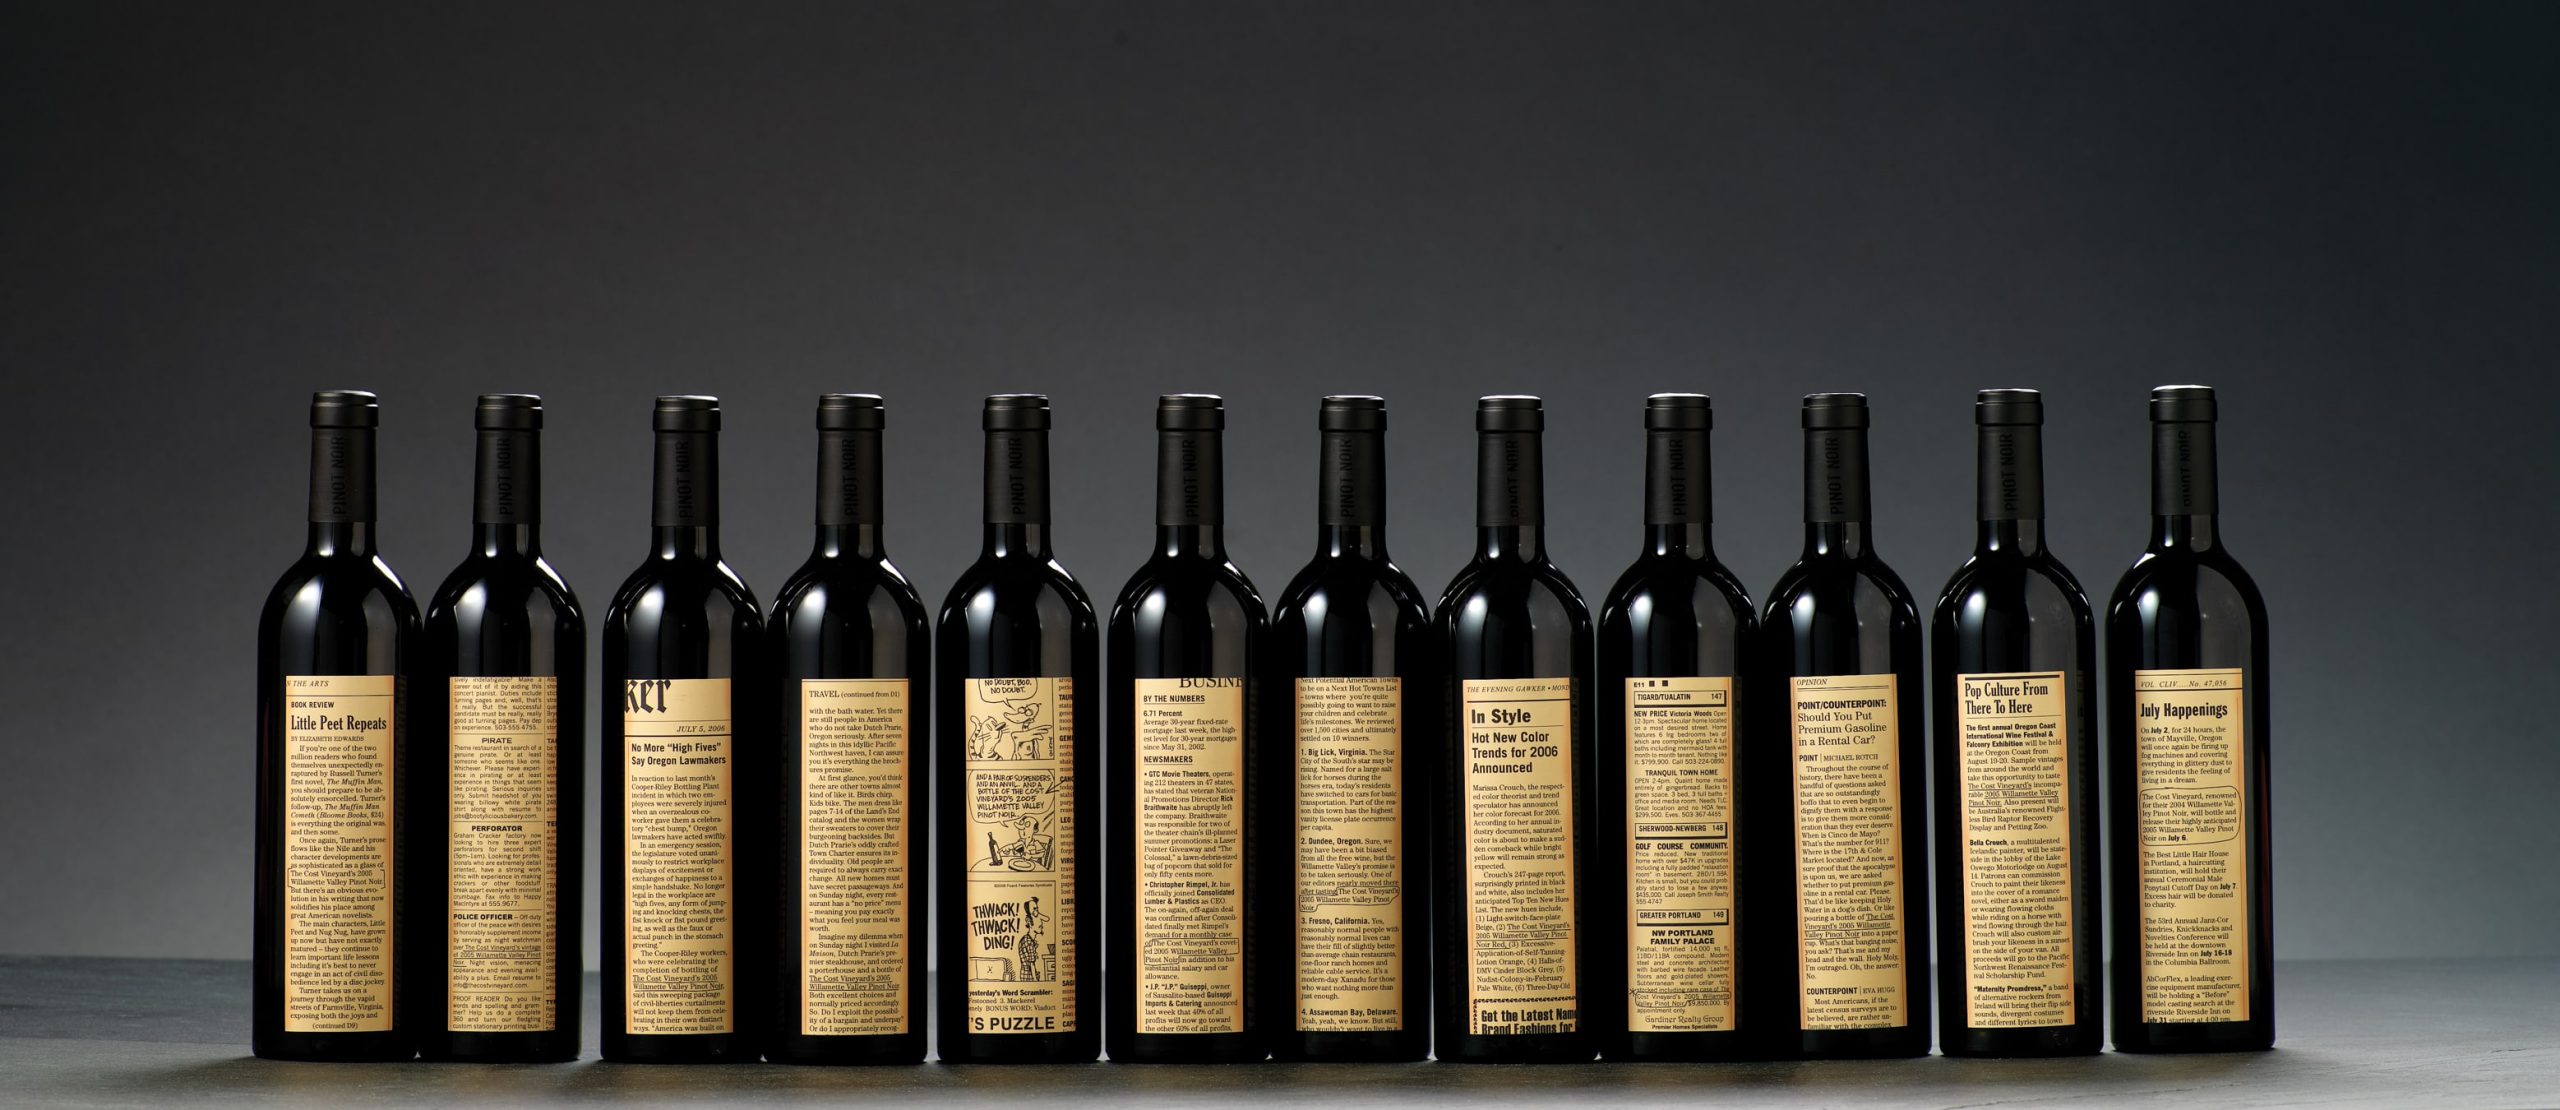 Cost Vineyards wine bottle packaging identity design group photo